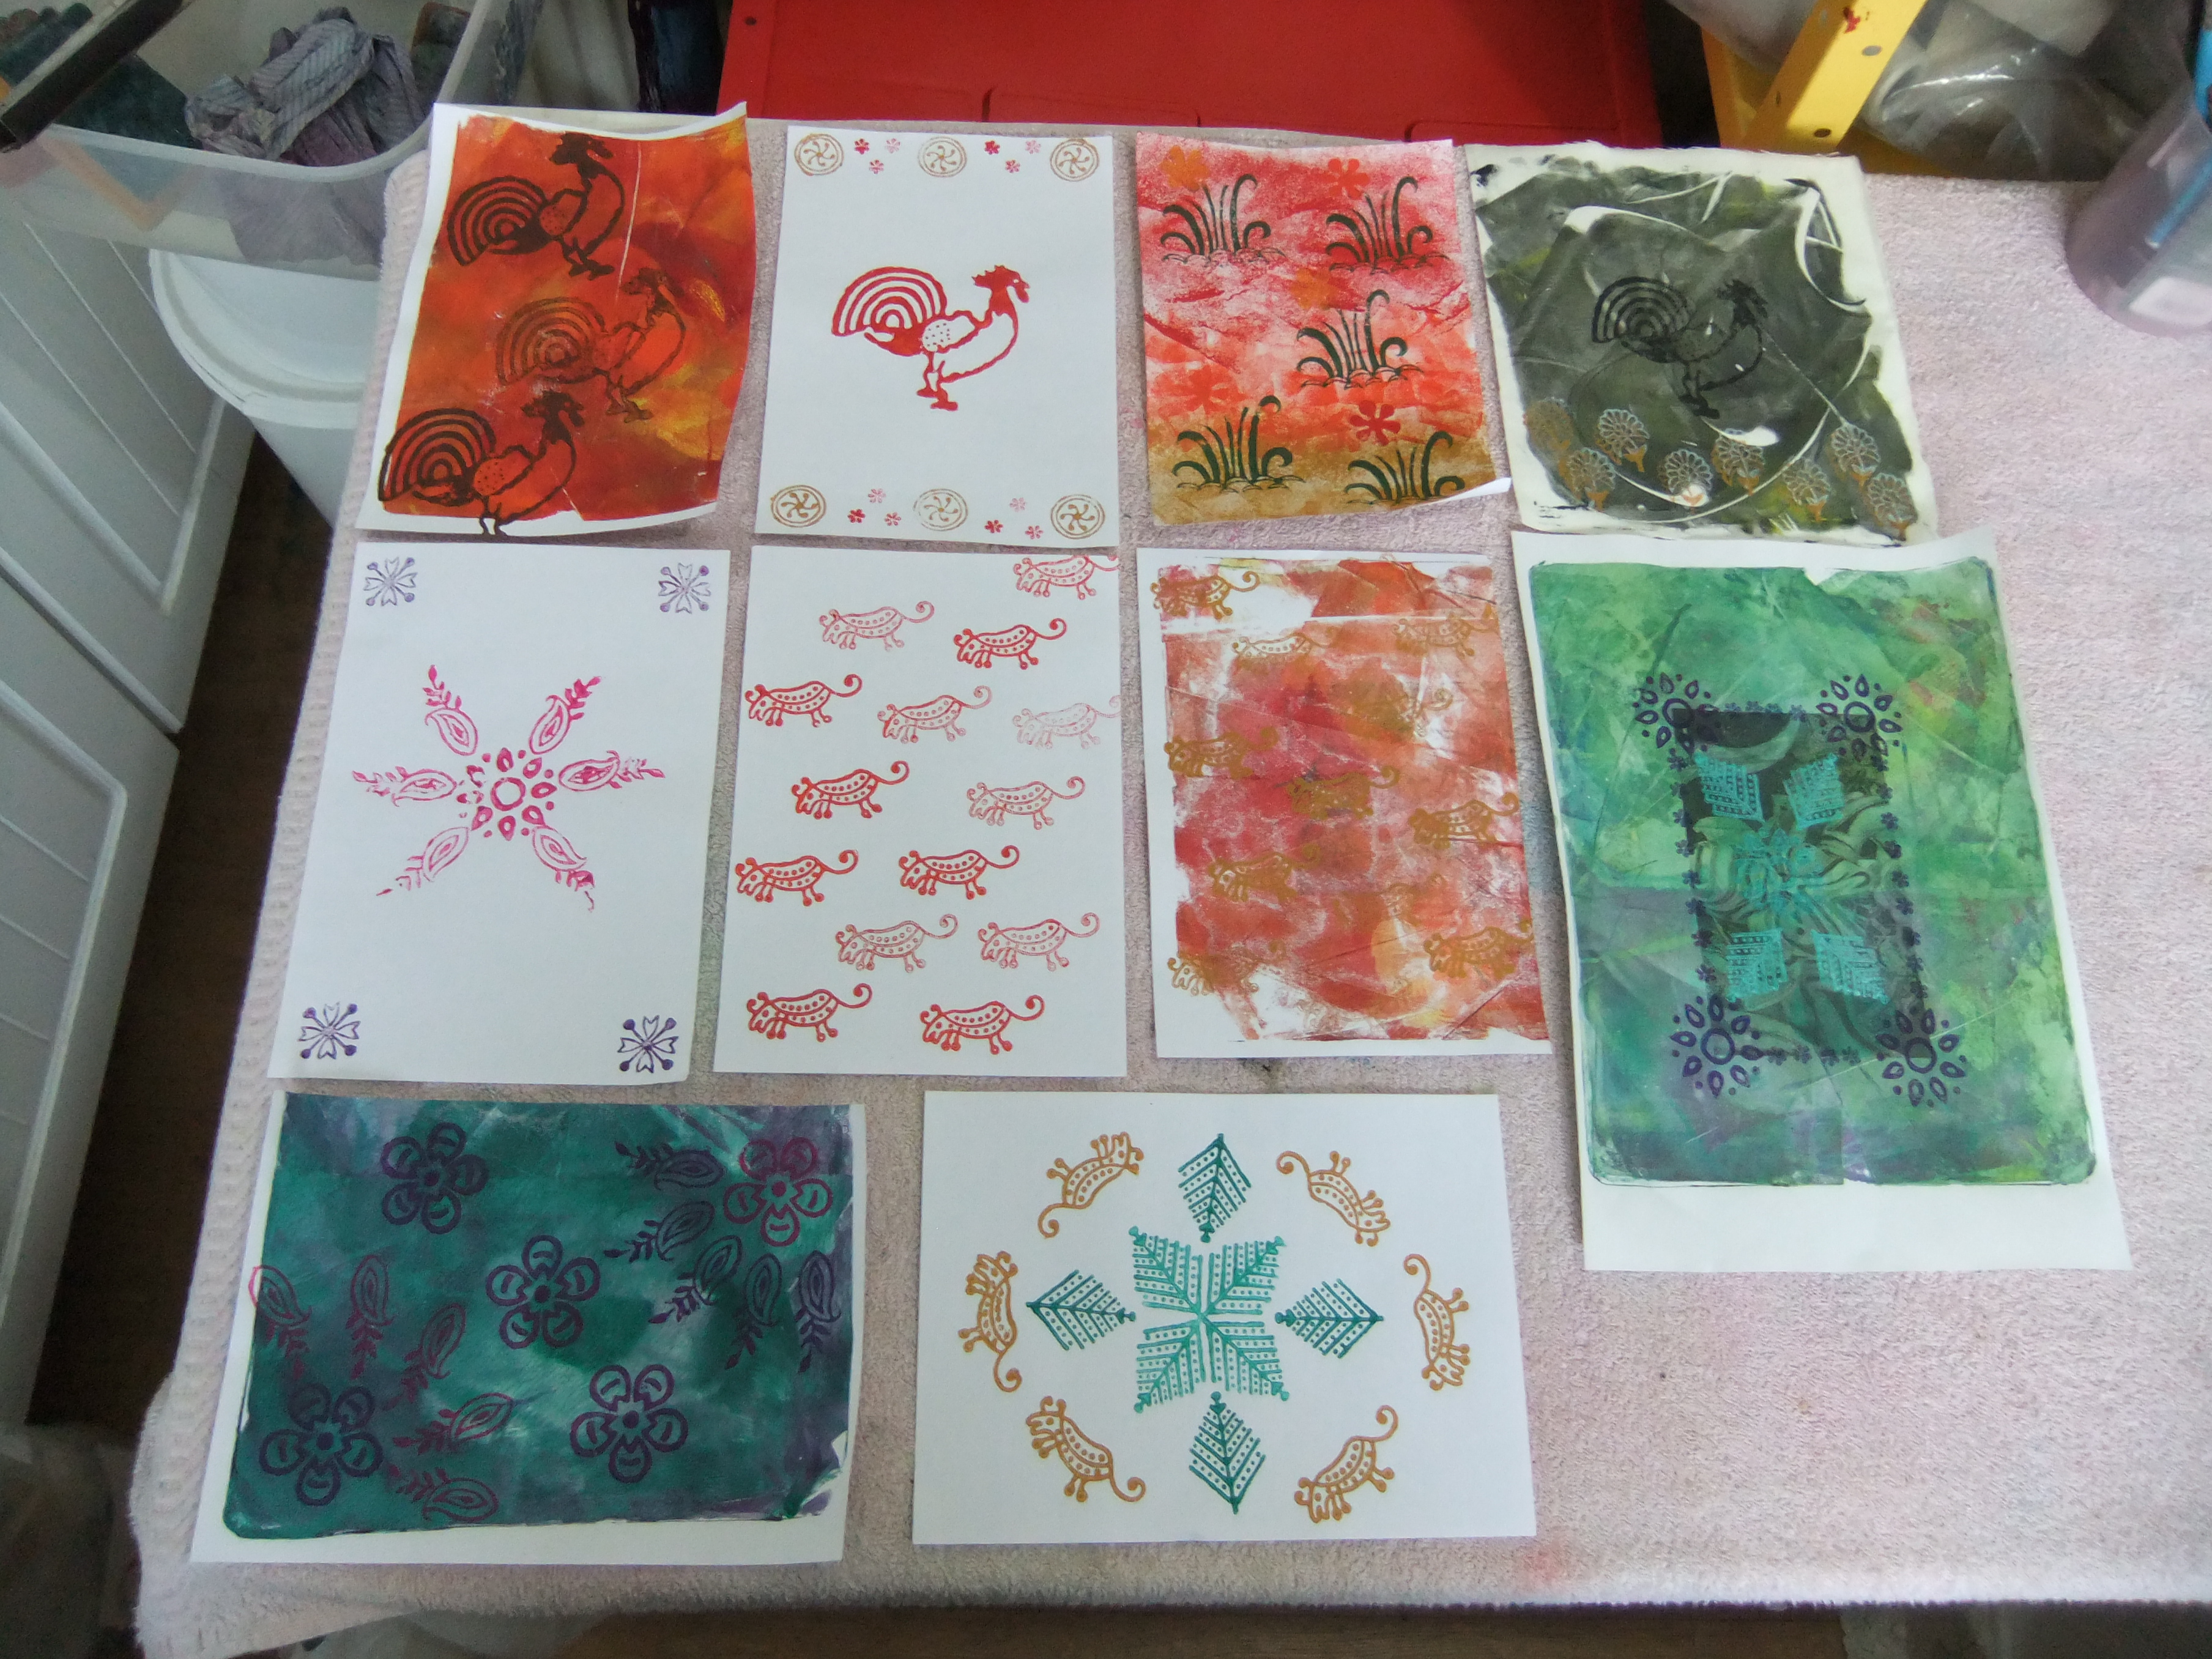 Workshops & Courses with Debbie Tomkies - Introduction to Blockprinting on fabric